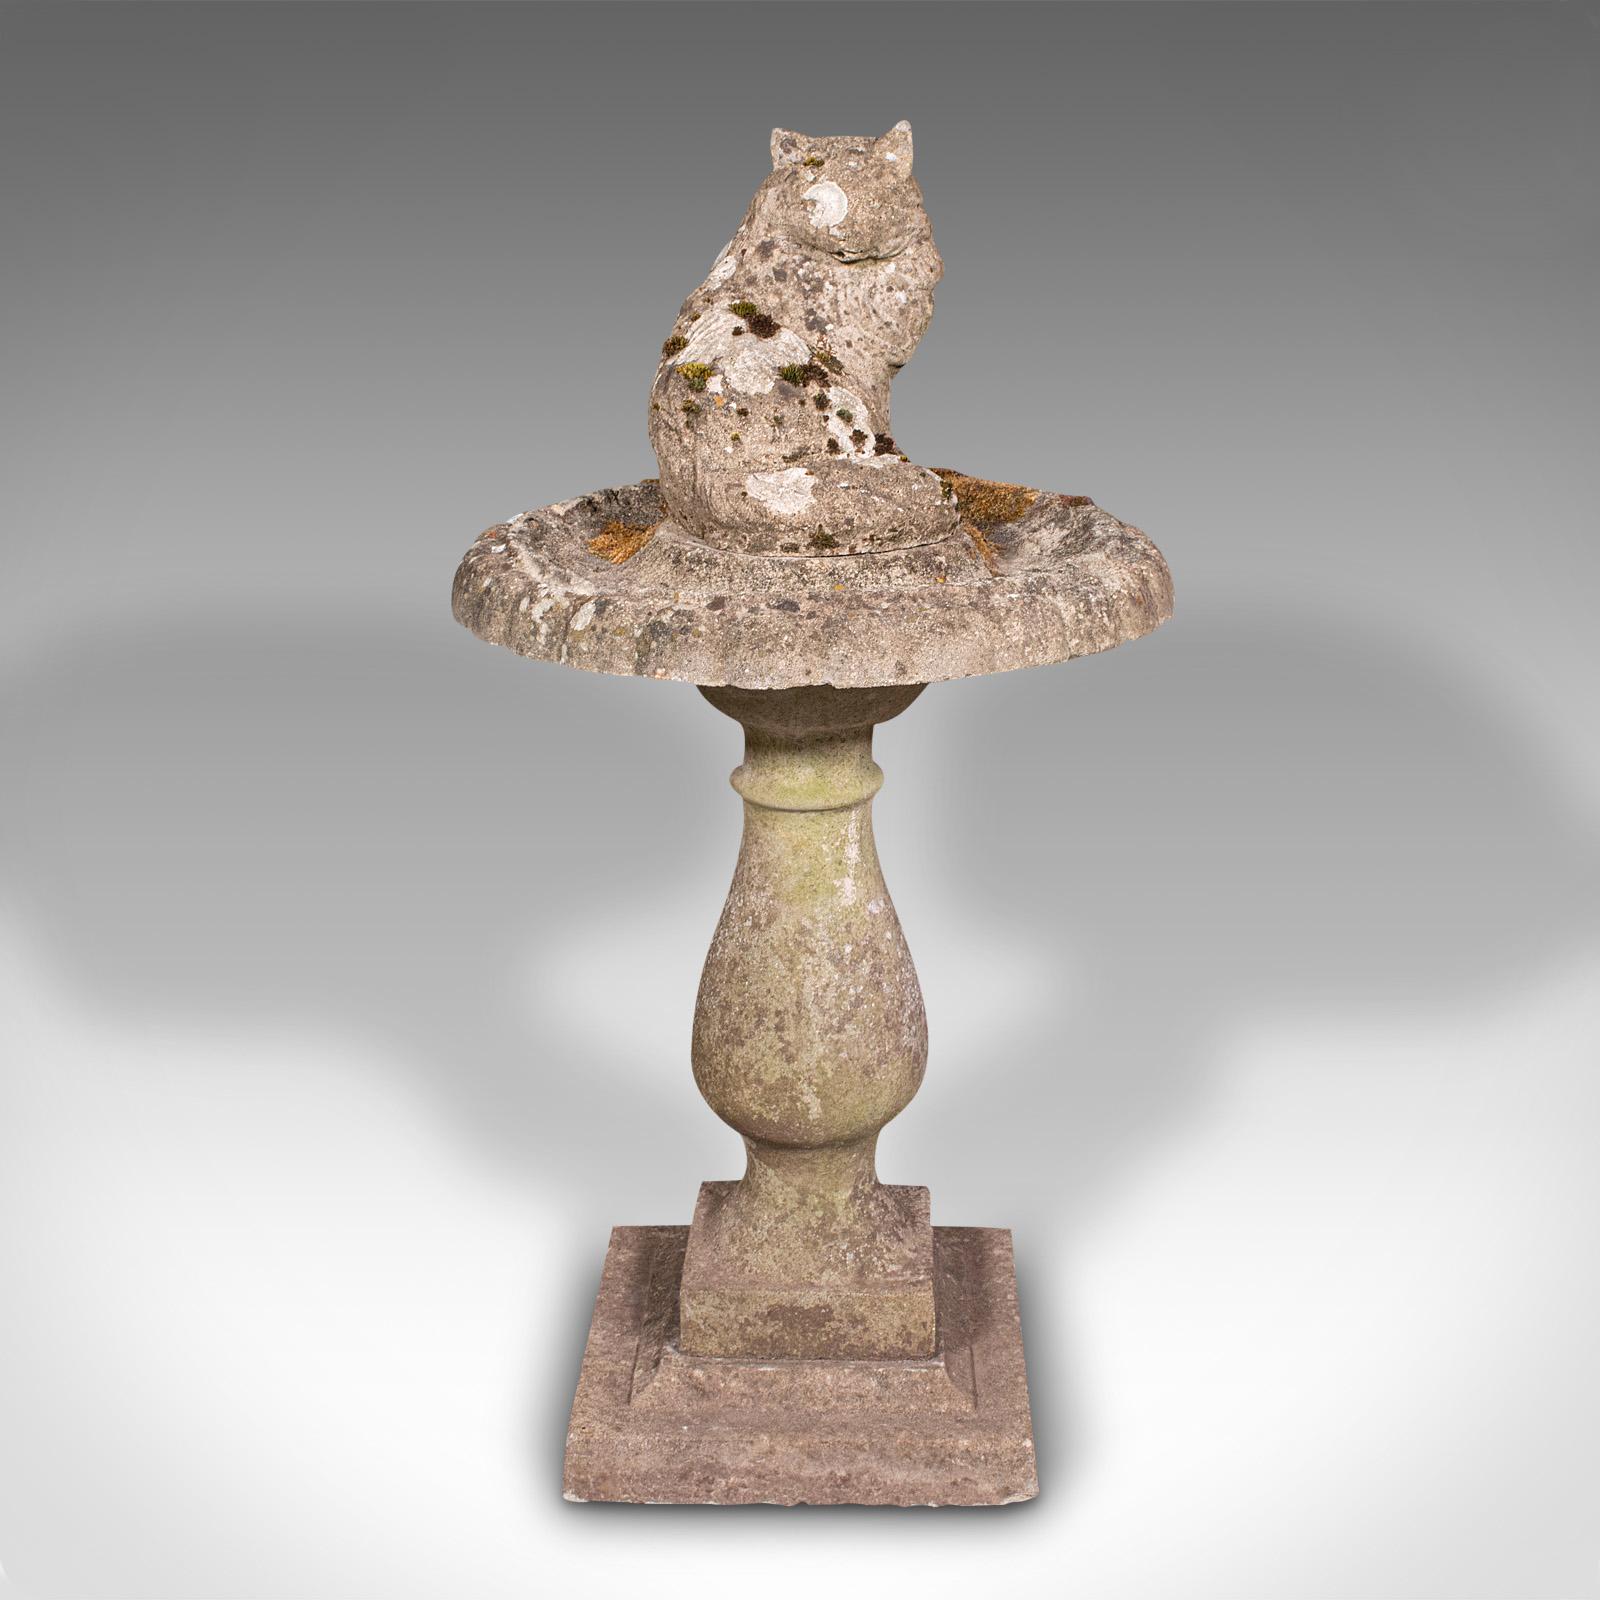 This is a vintage garden bird bath. An English, York Stone decorative outdoor ornament, dating to the mid 20th century, circa 1950.

Accentuate your garden with this charming, cat-topped bird bath
Displays a desirable aged patina throughout, with